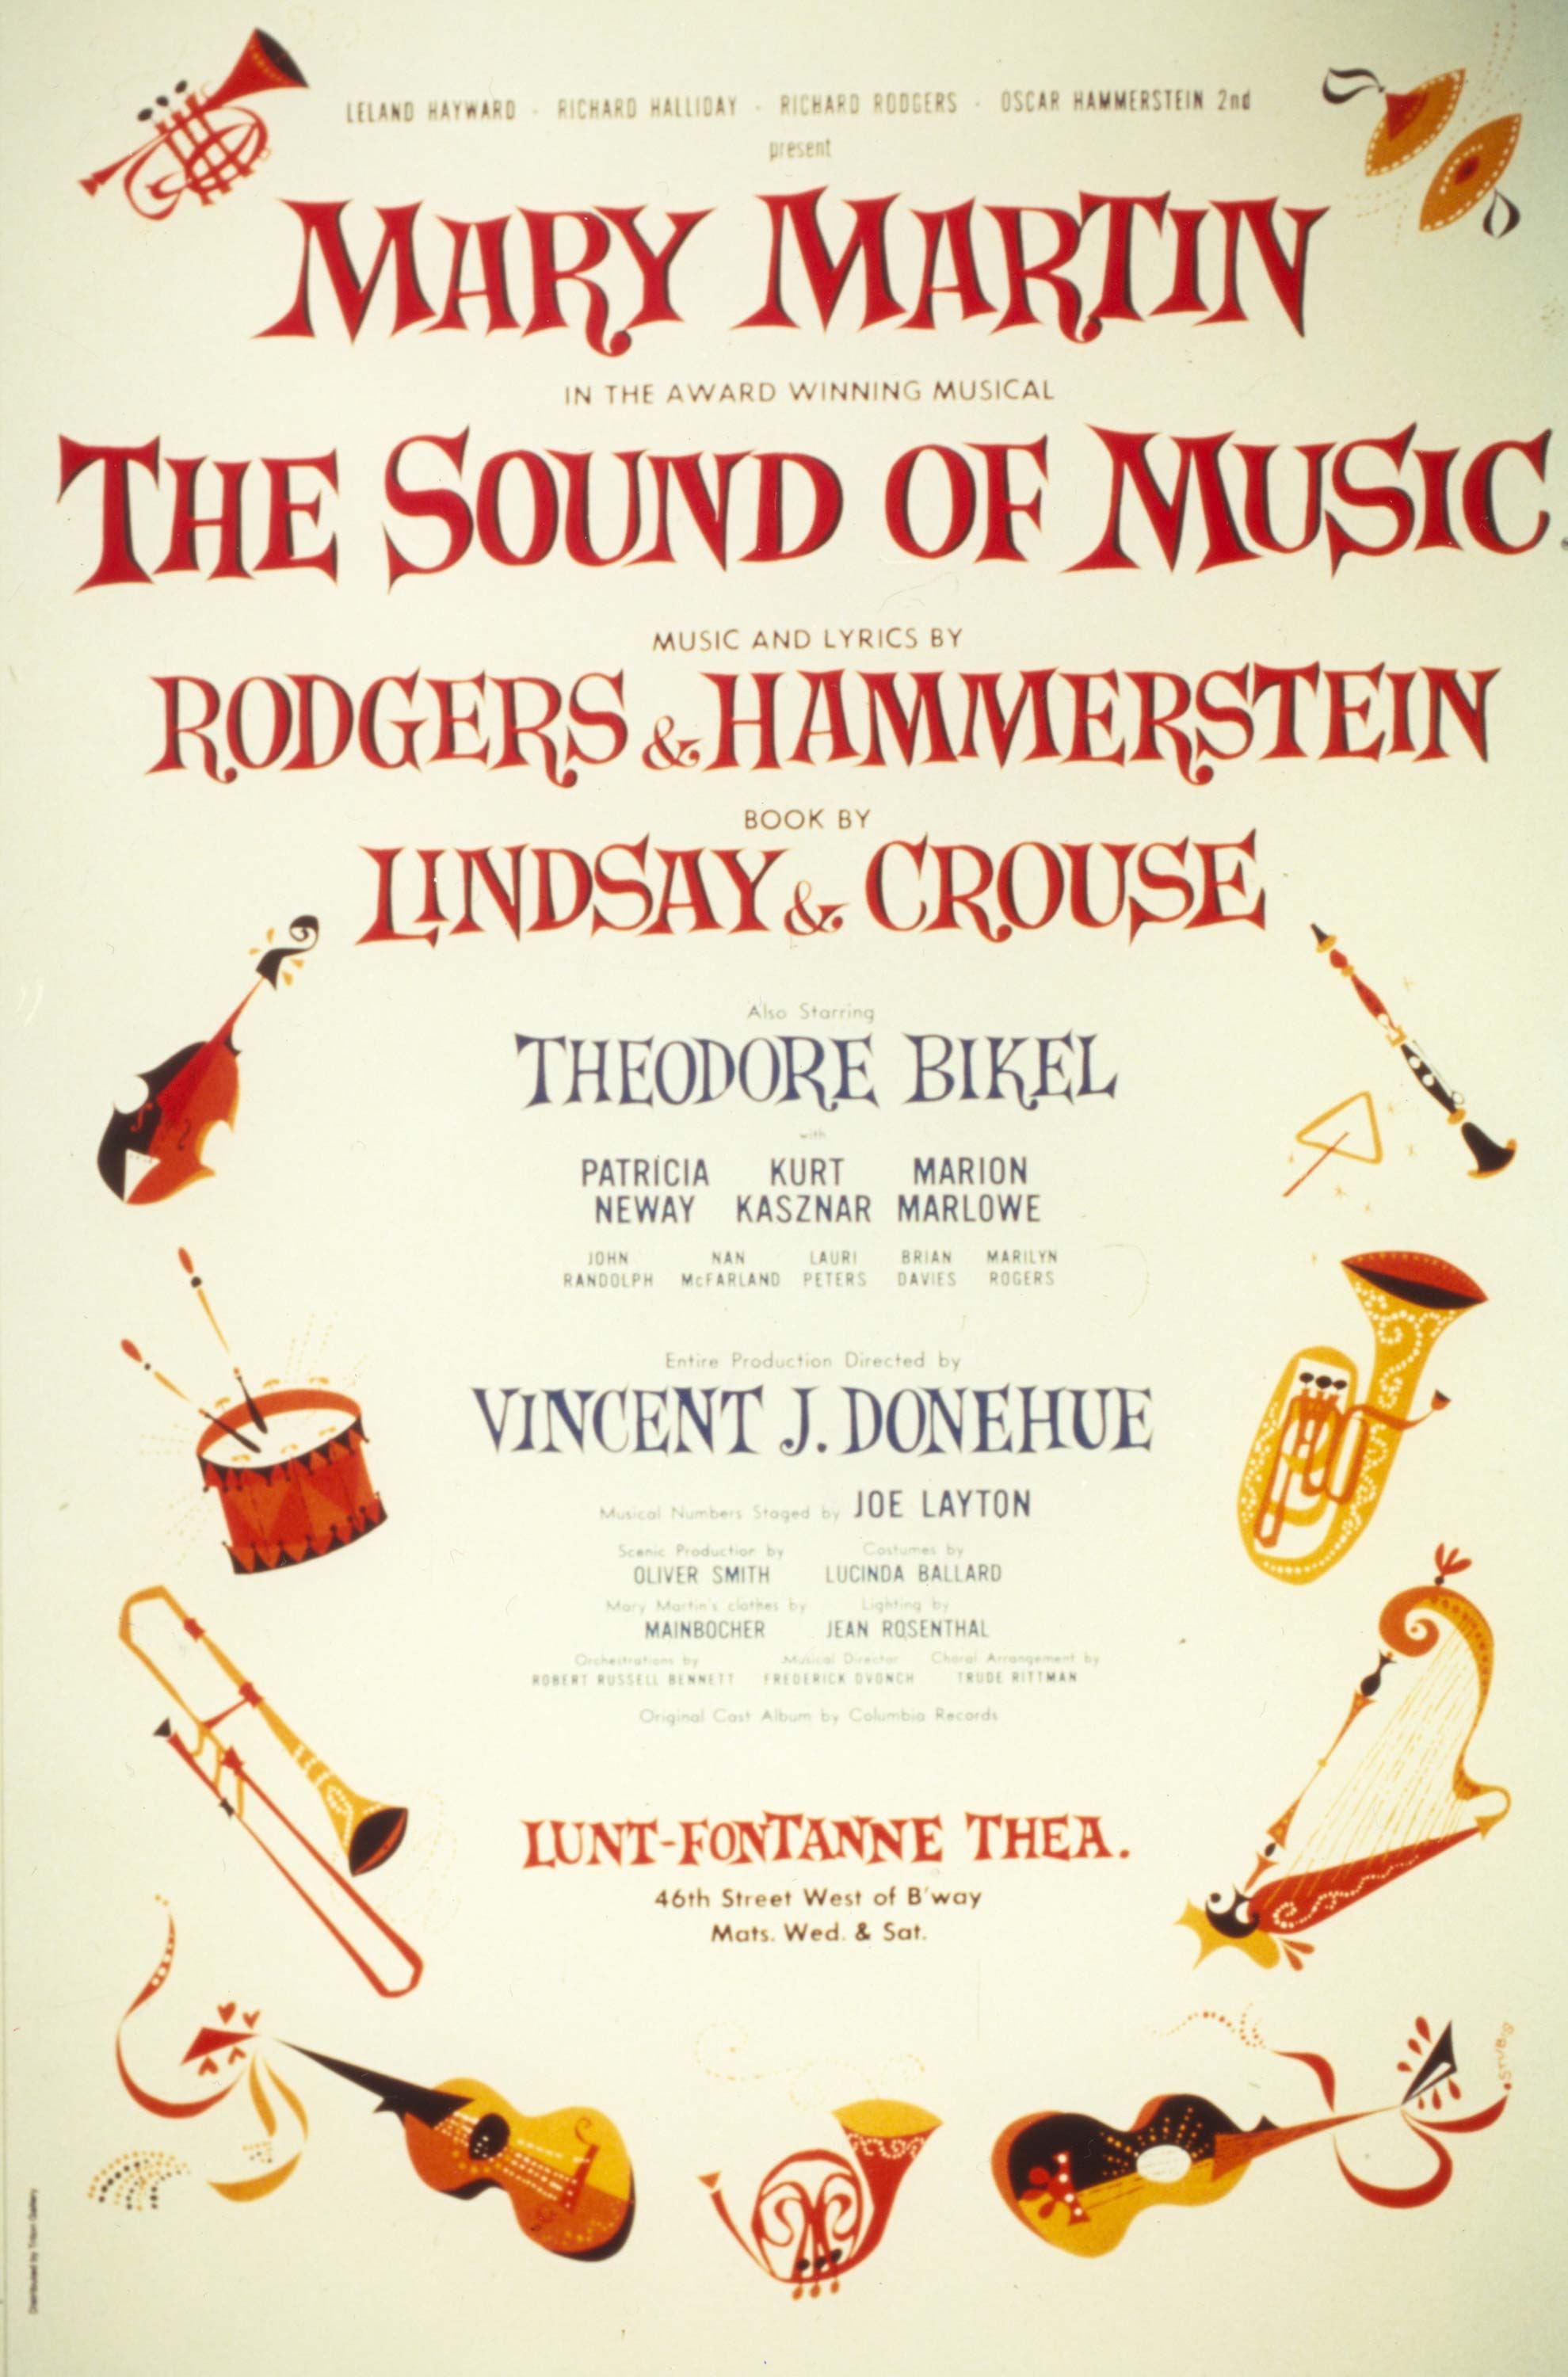 A poster from the 1959 Broadway production of The Sound of Music.